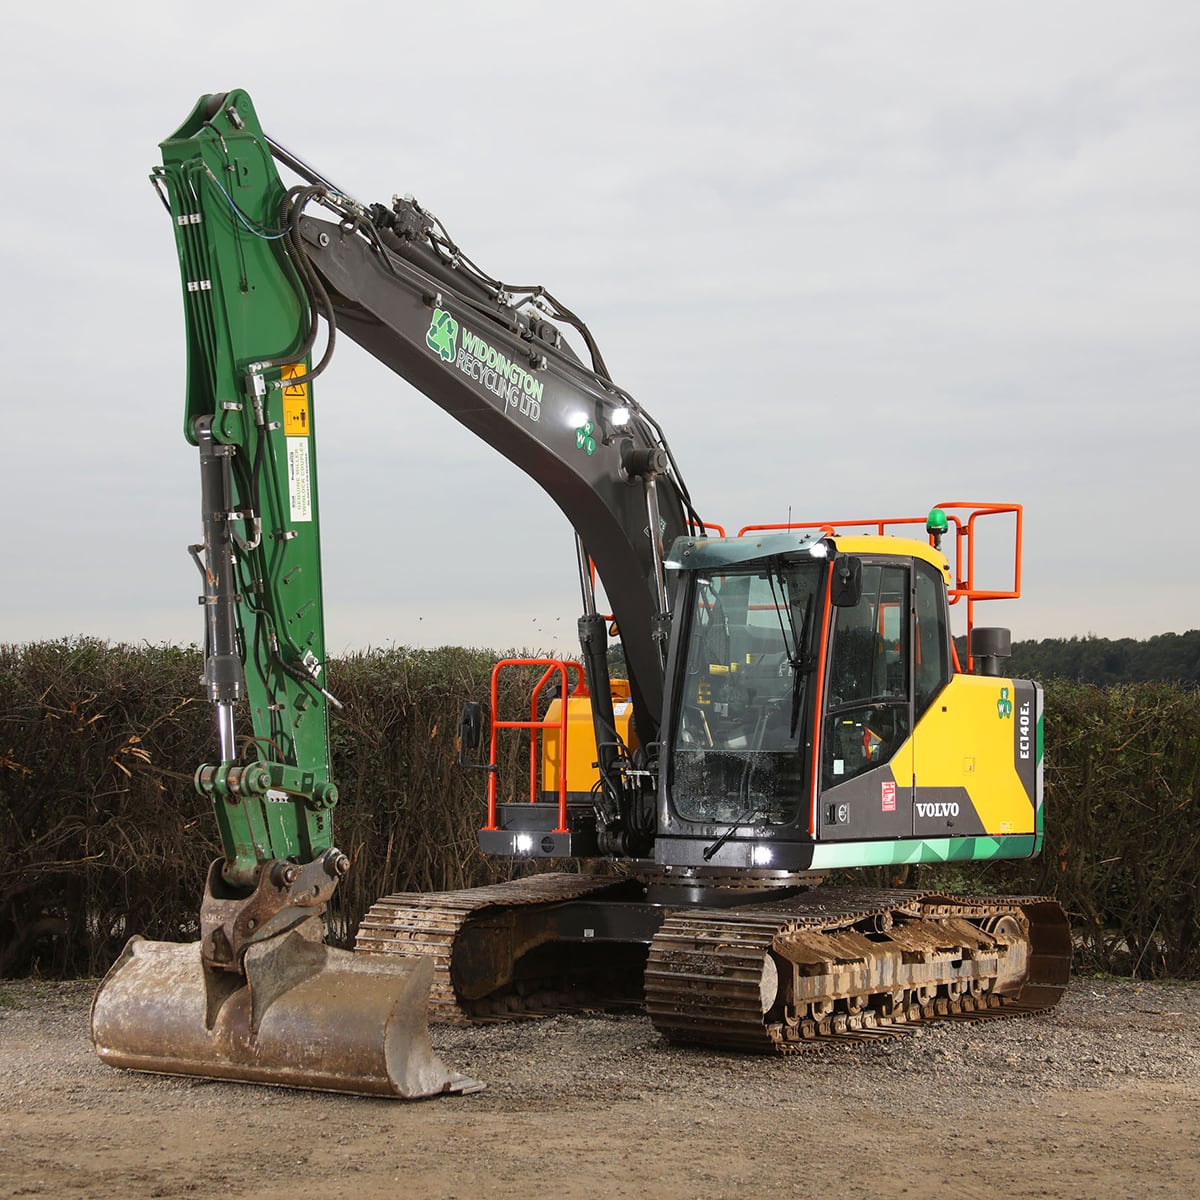 Image of a branded excavator for hire from widdington recycling.